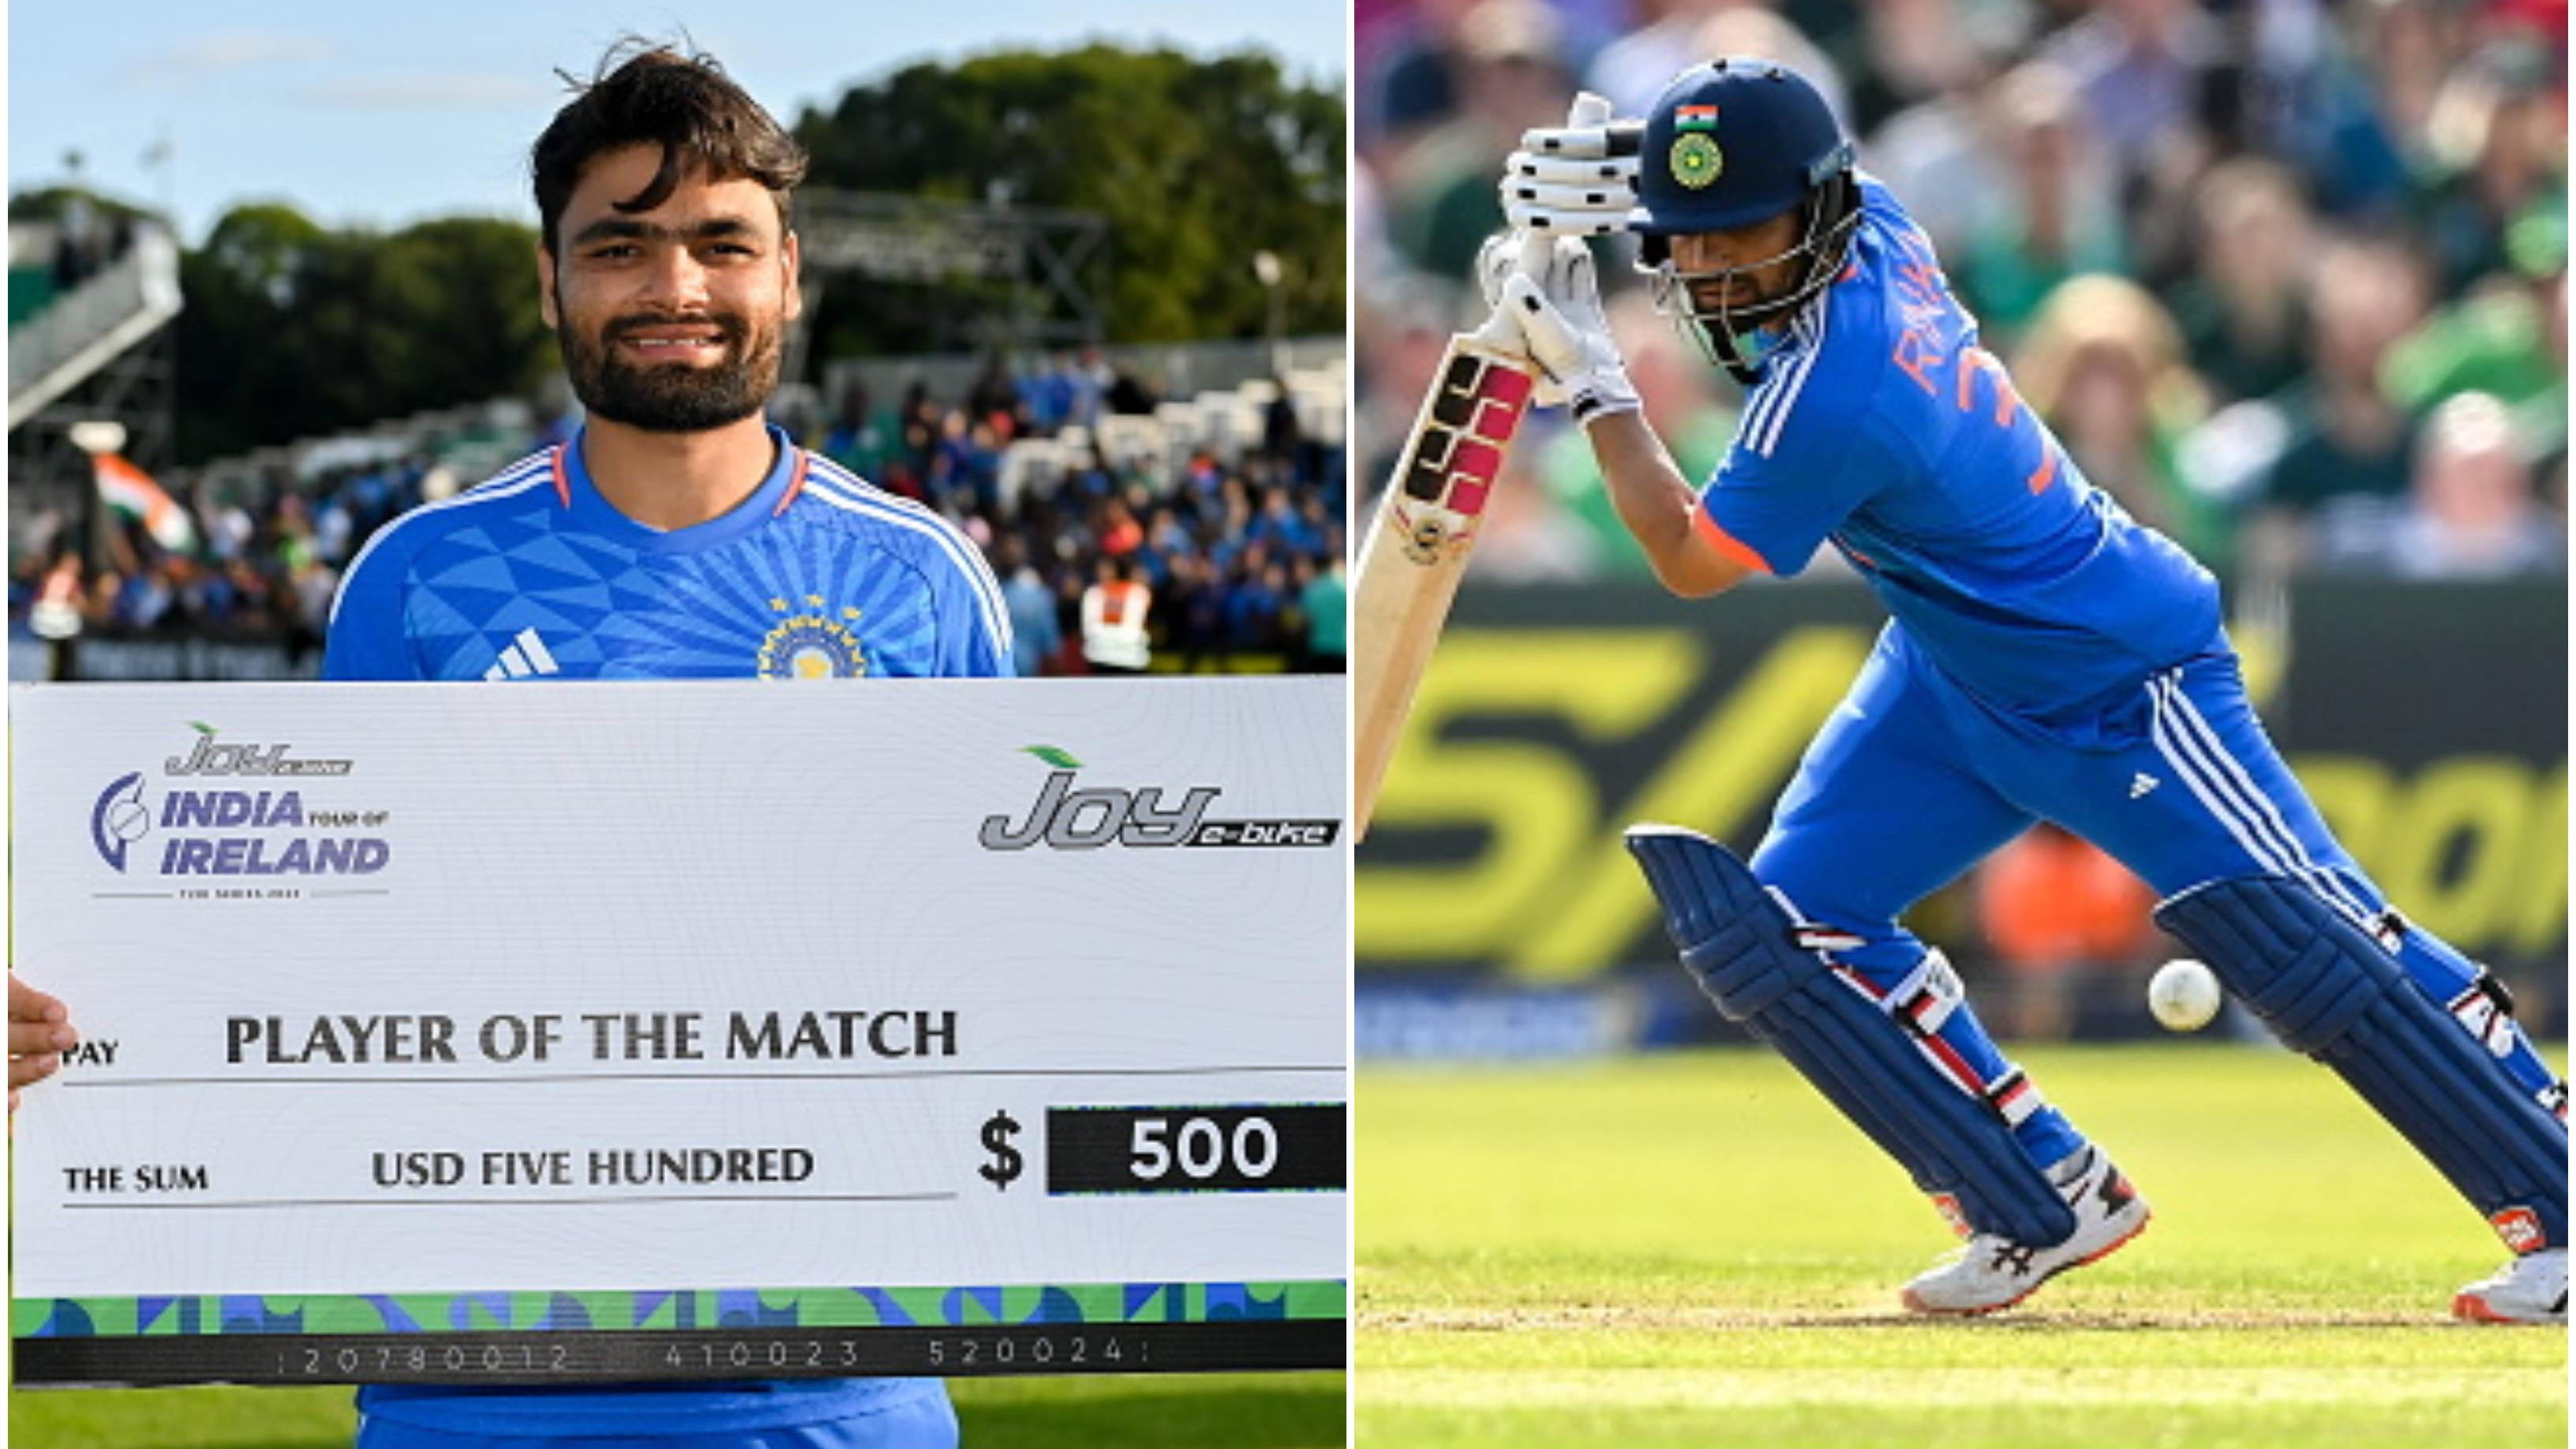 IRE v IND 2023: “Tried to replicate what I did in IPL,” says Rinku Singh after winning Player-of-the-Match award in 2nd T20I